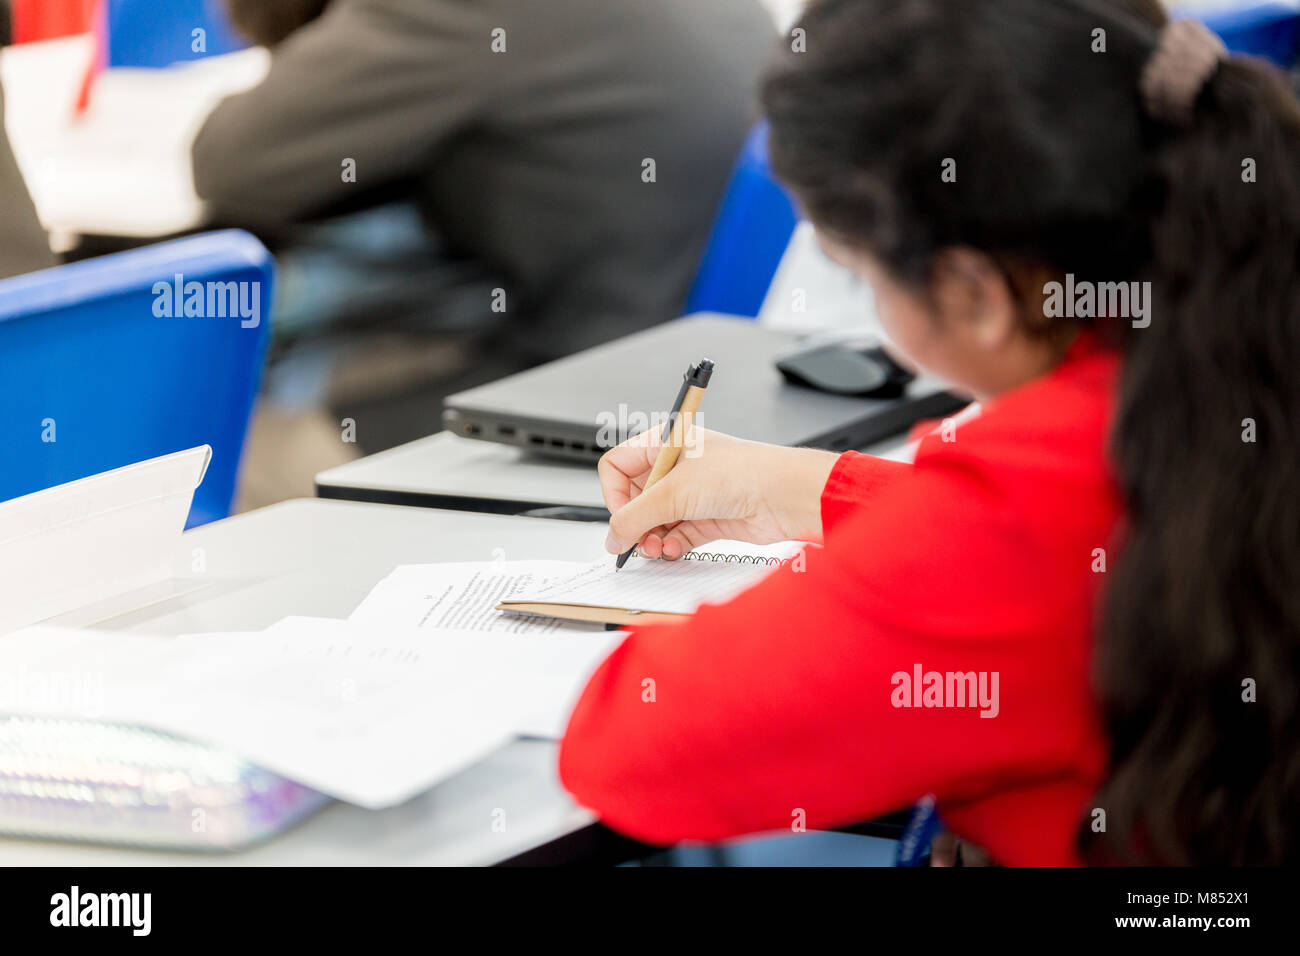 Student studying hard in class Stock Photo